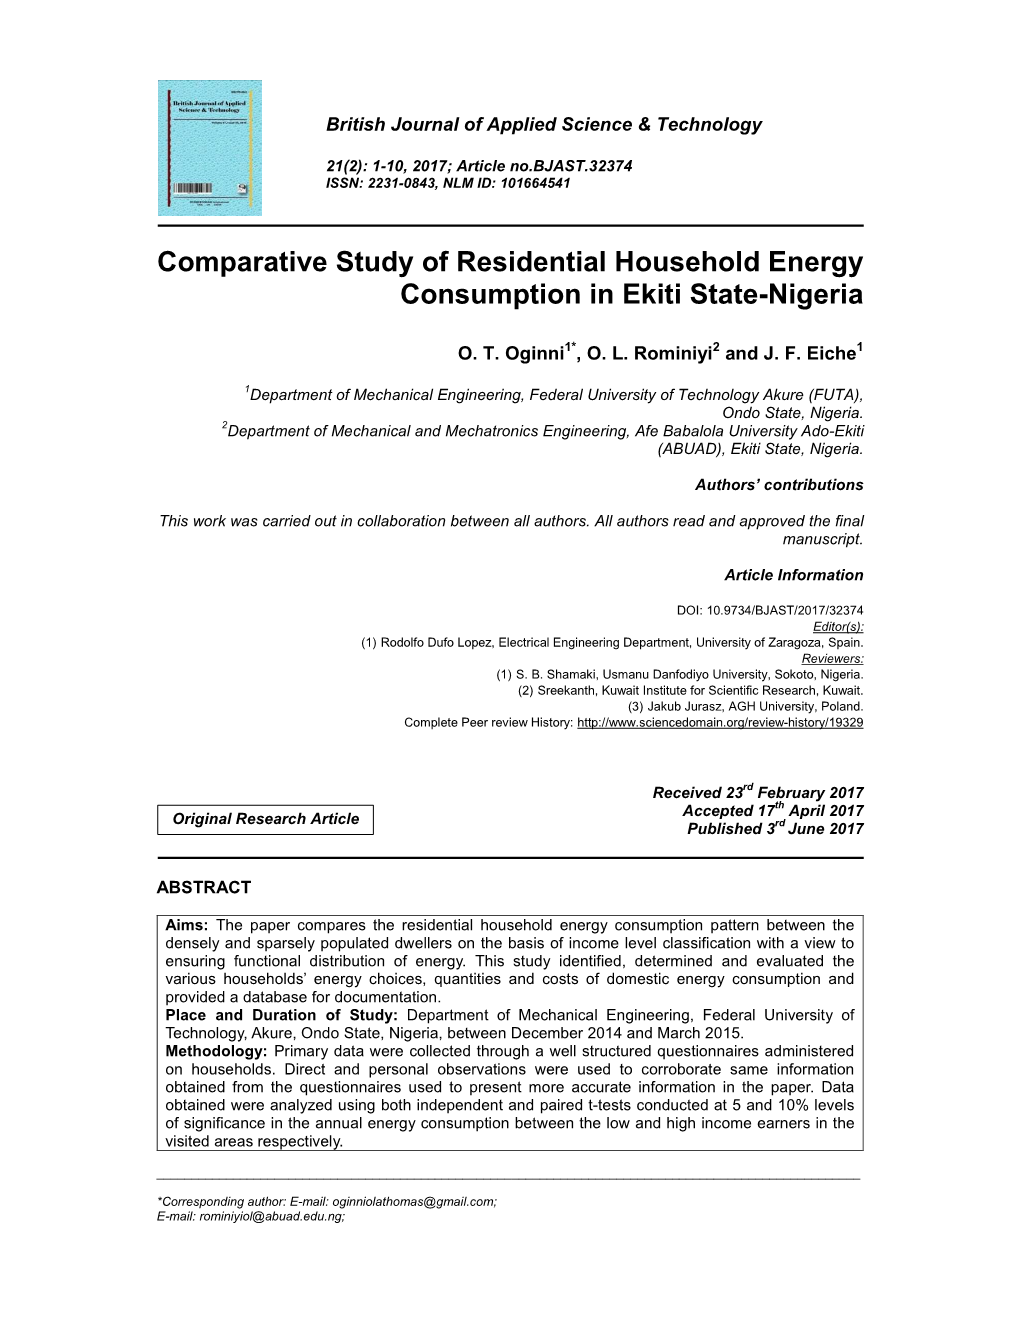 Comparative Study of Residential Household Energy Consumption in Ekiti State-Nigeria